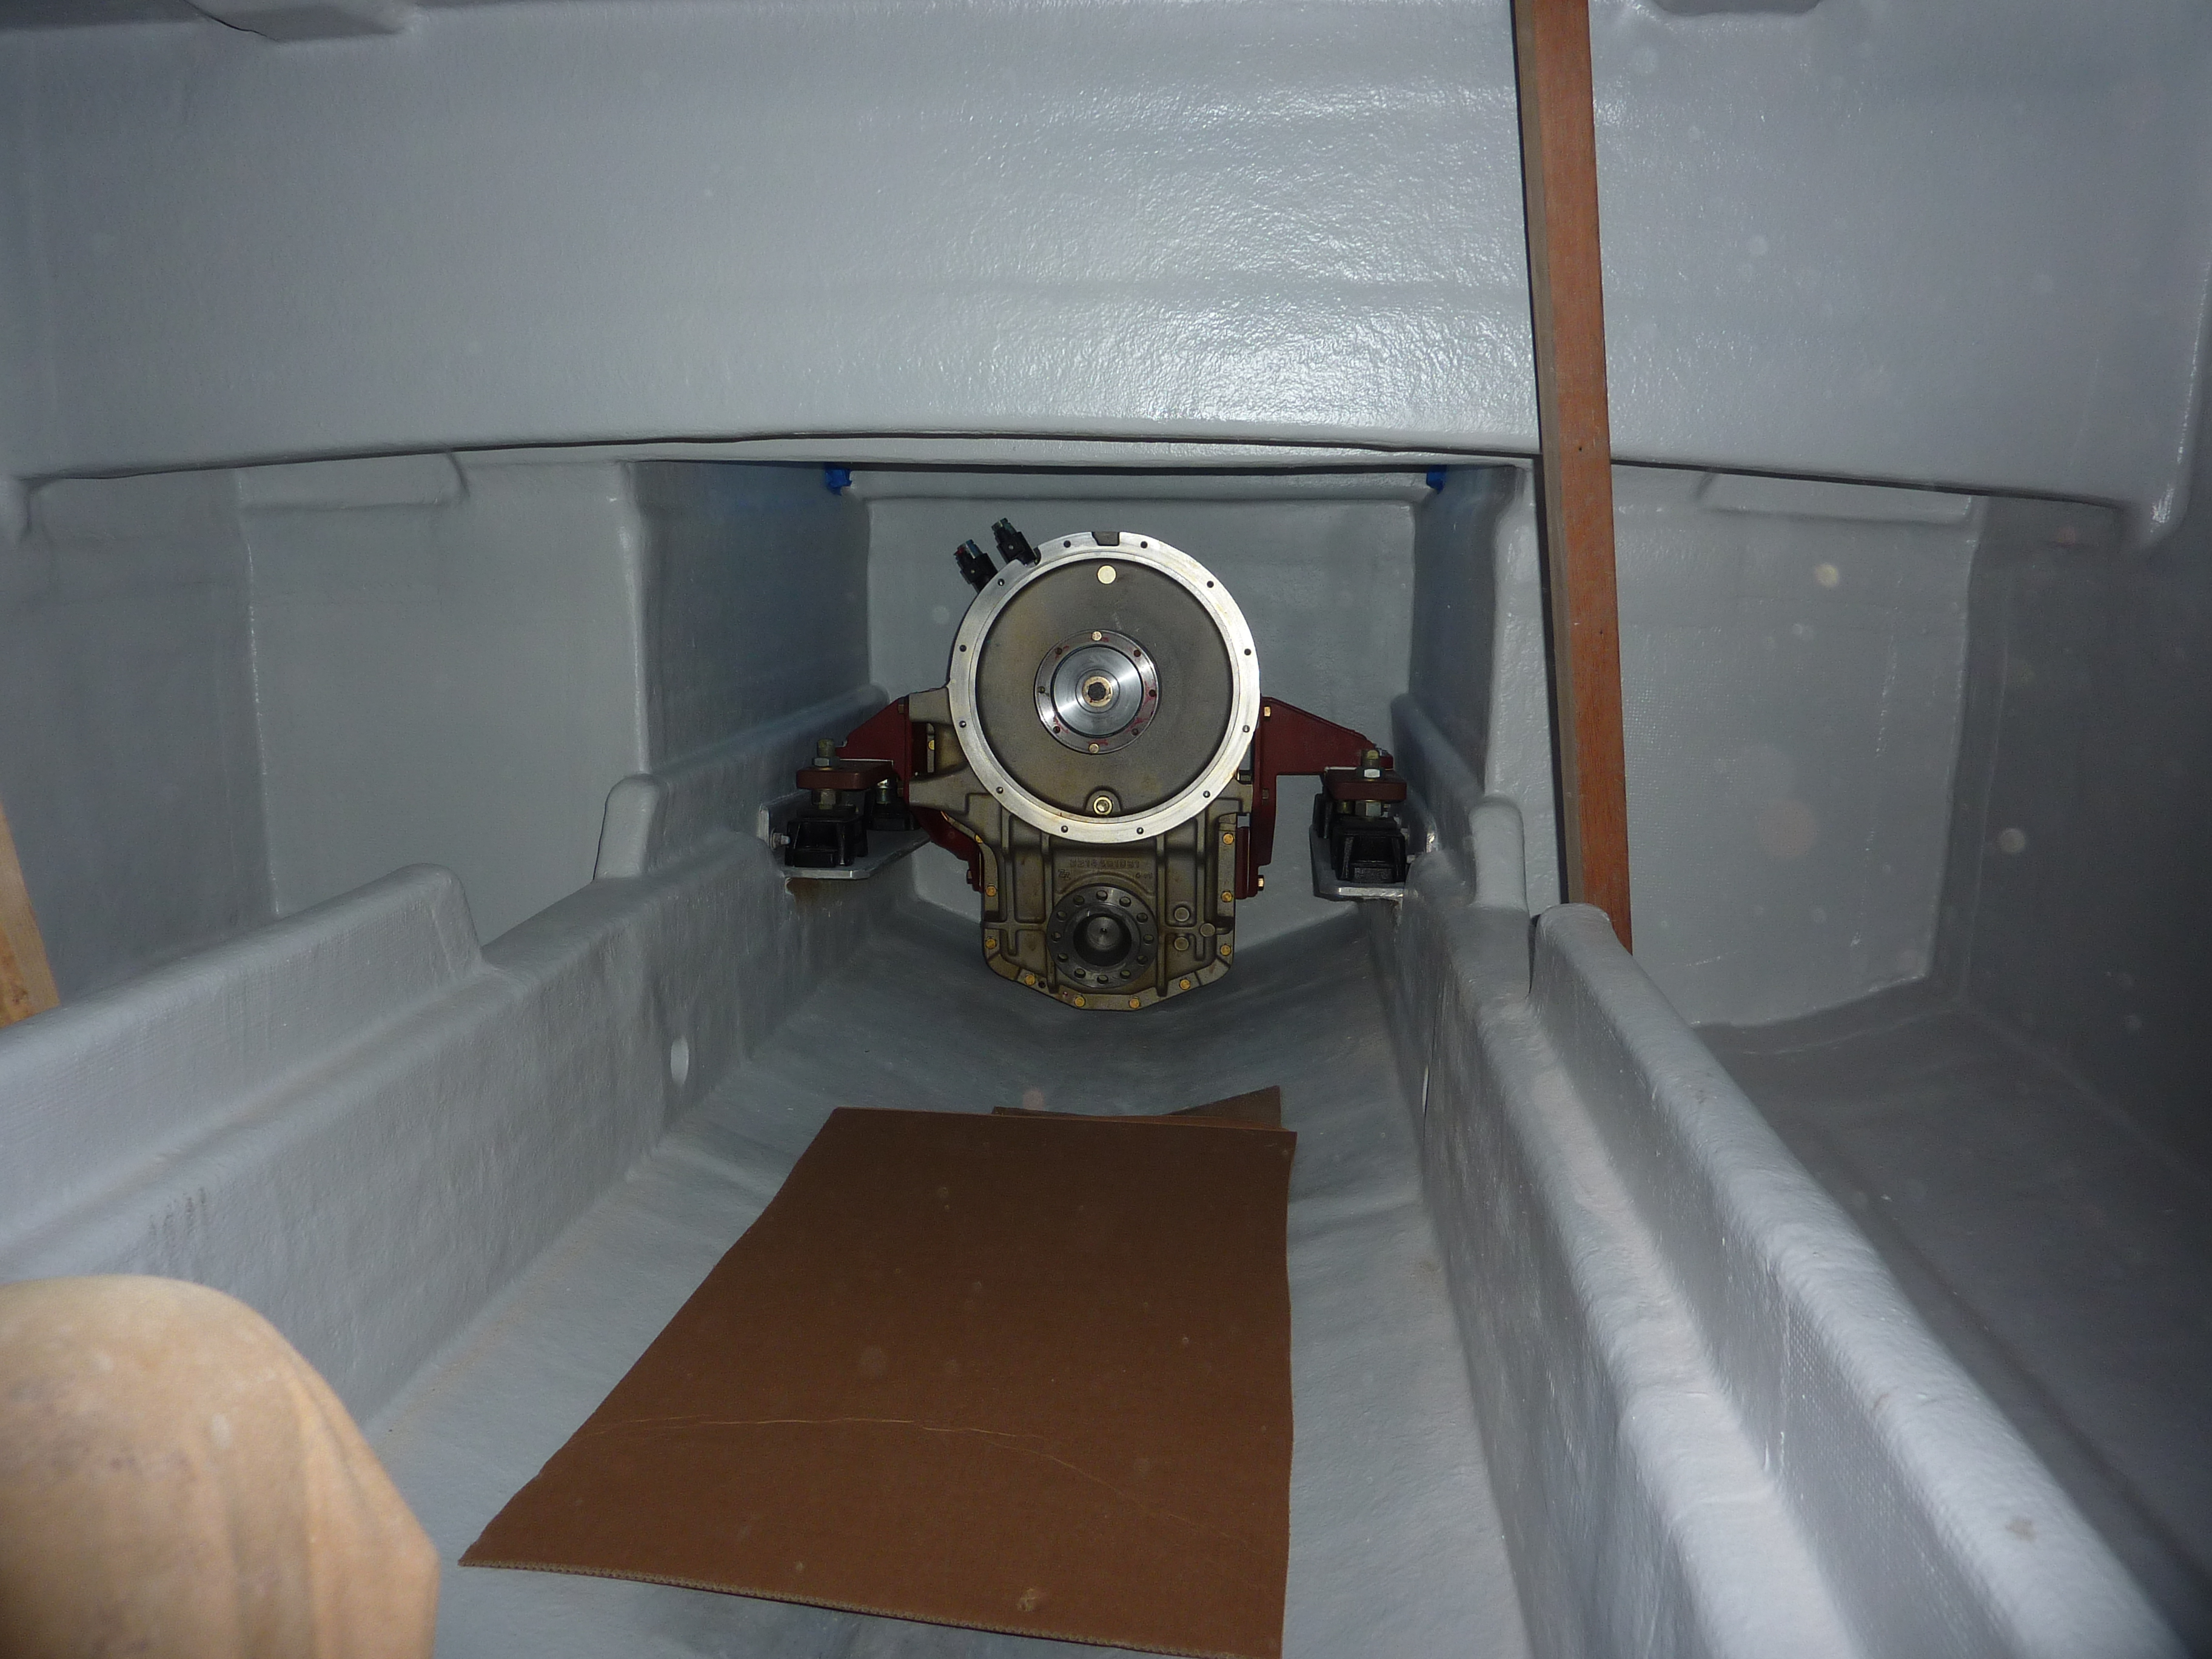 The ZF325IV sitting on it mounts under the deck approx 12 ft forward of the transom.